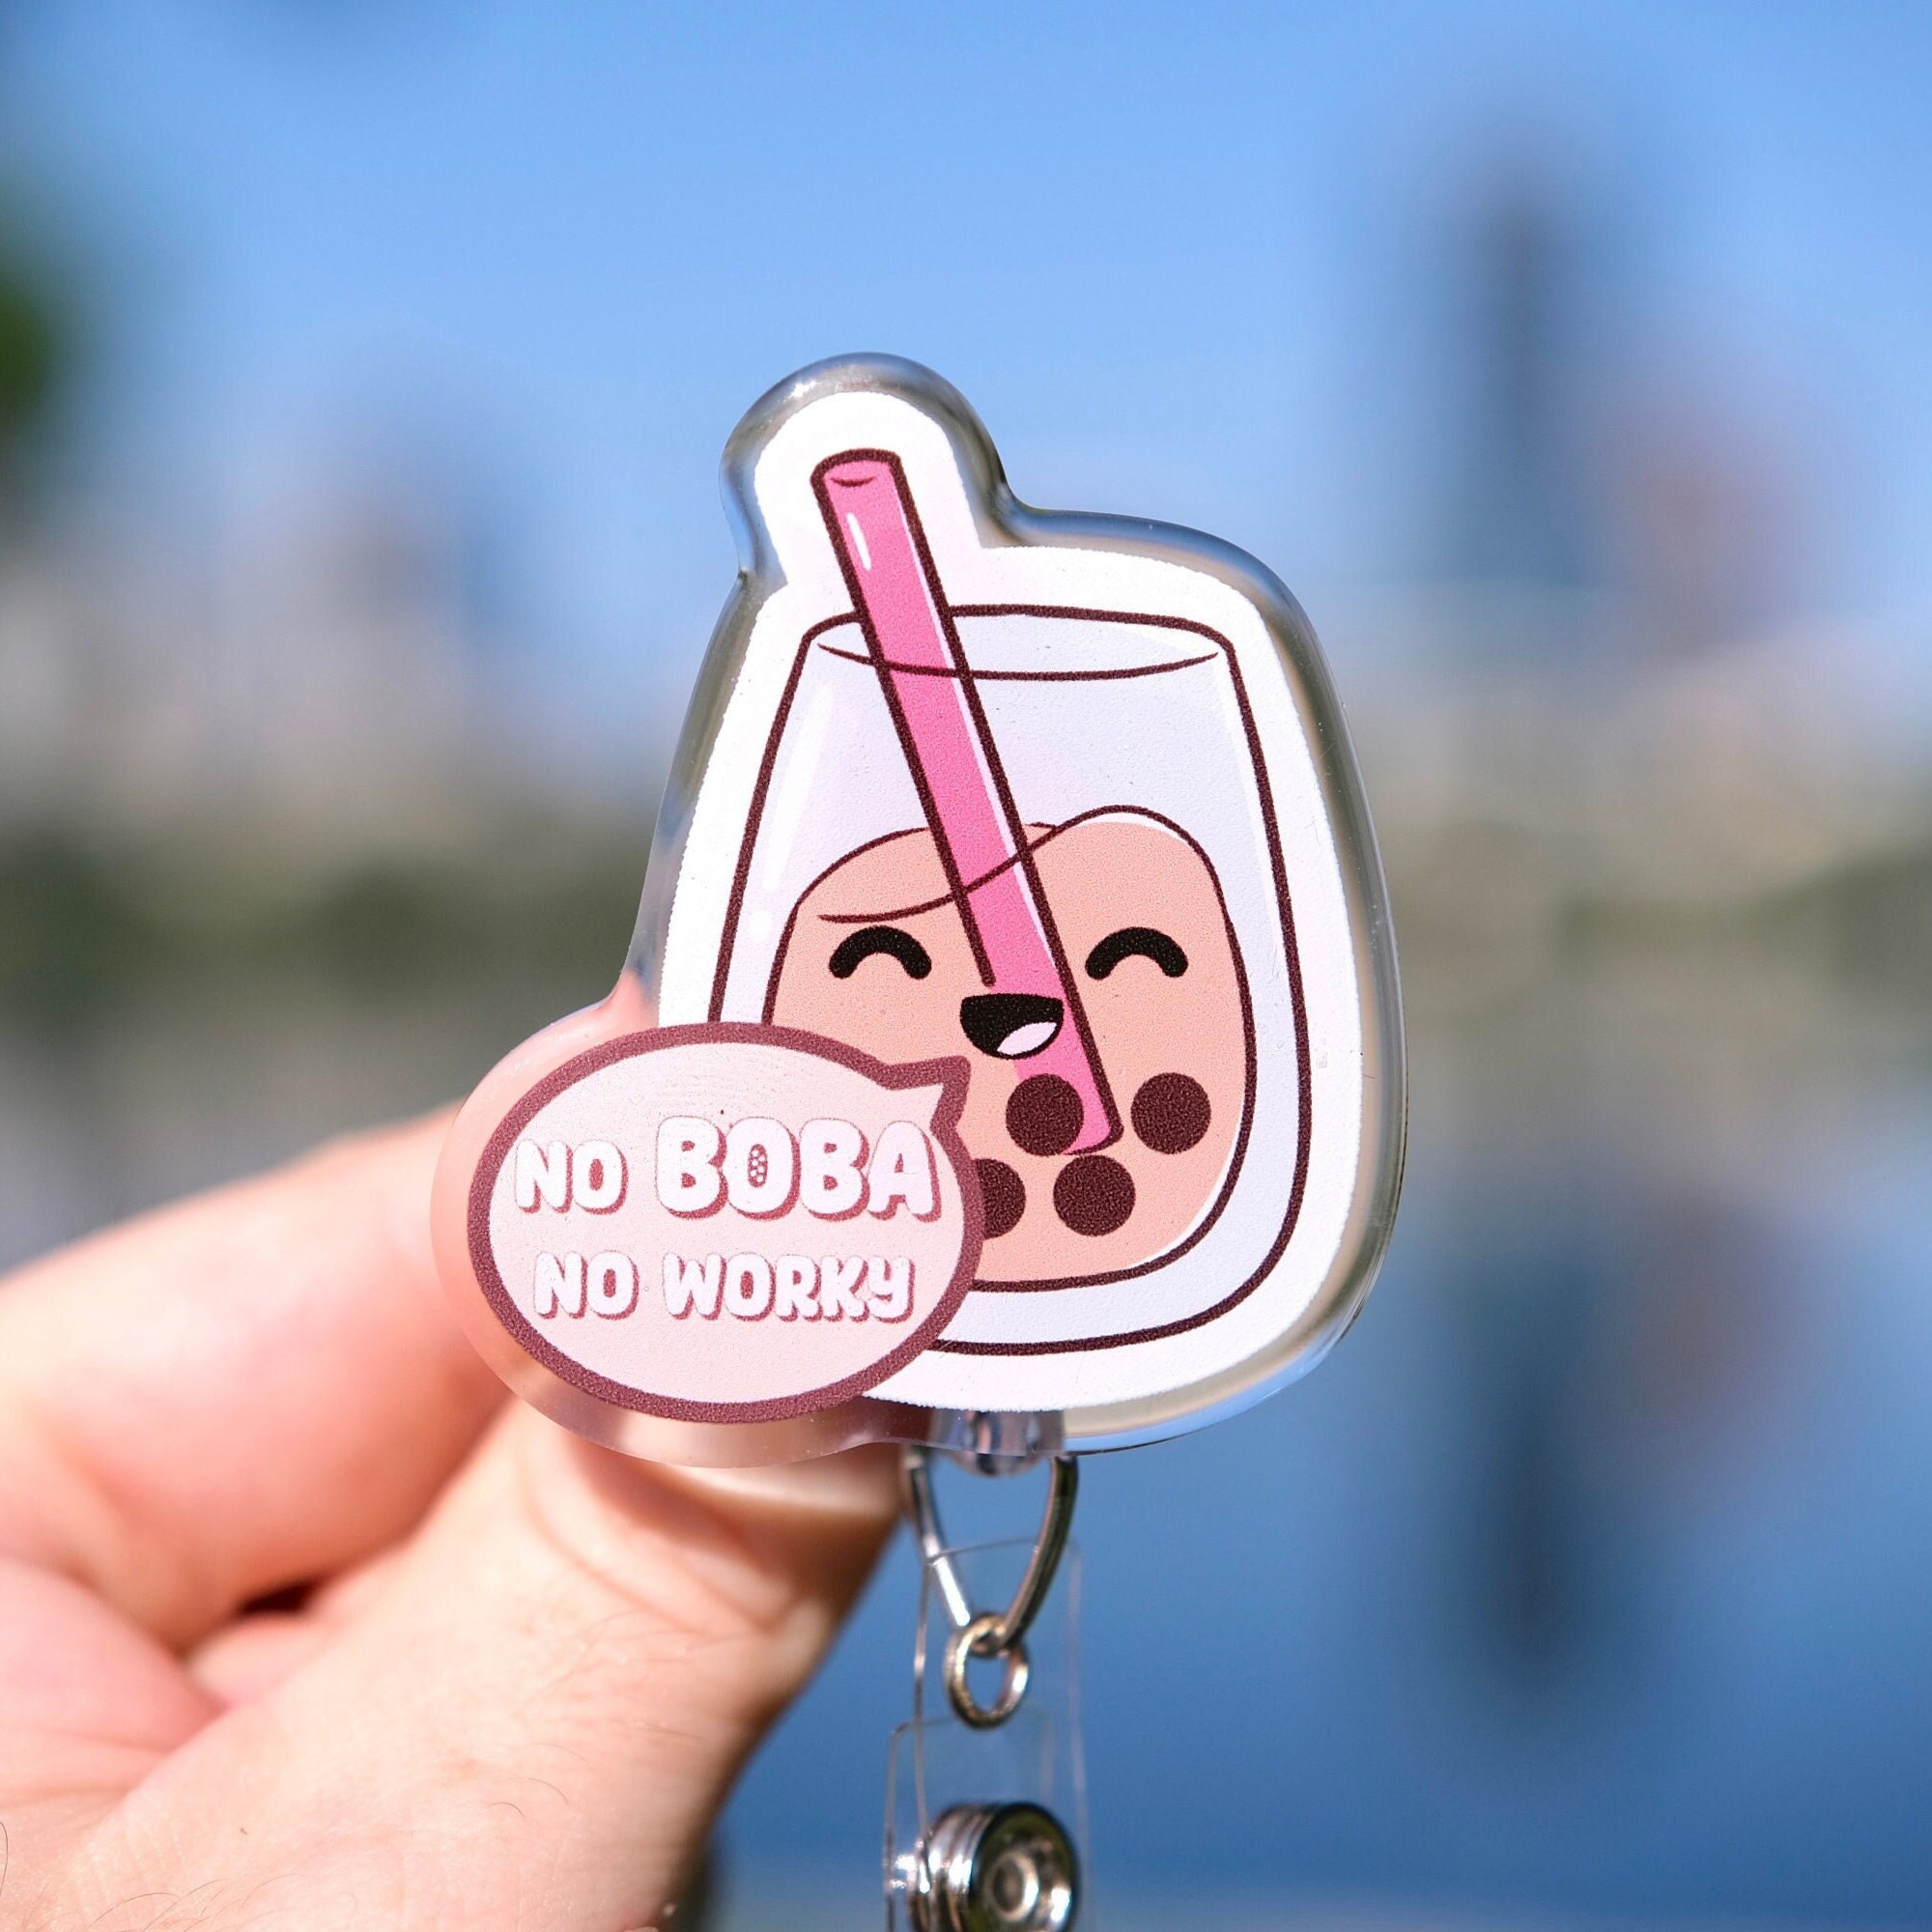 Check out our new Boba badge, reel phone grip starter kit. This is